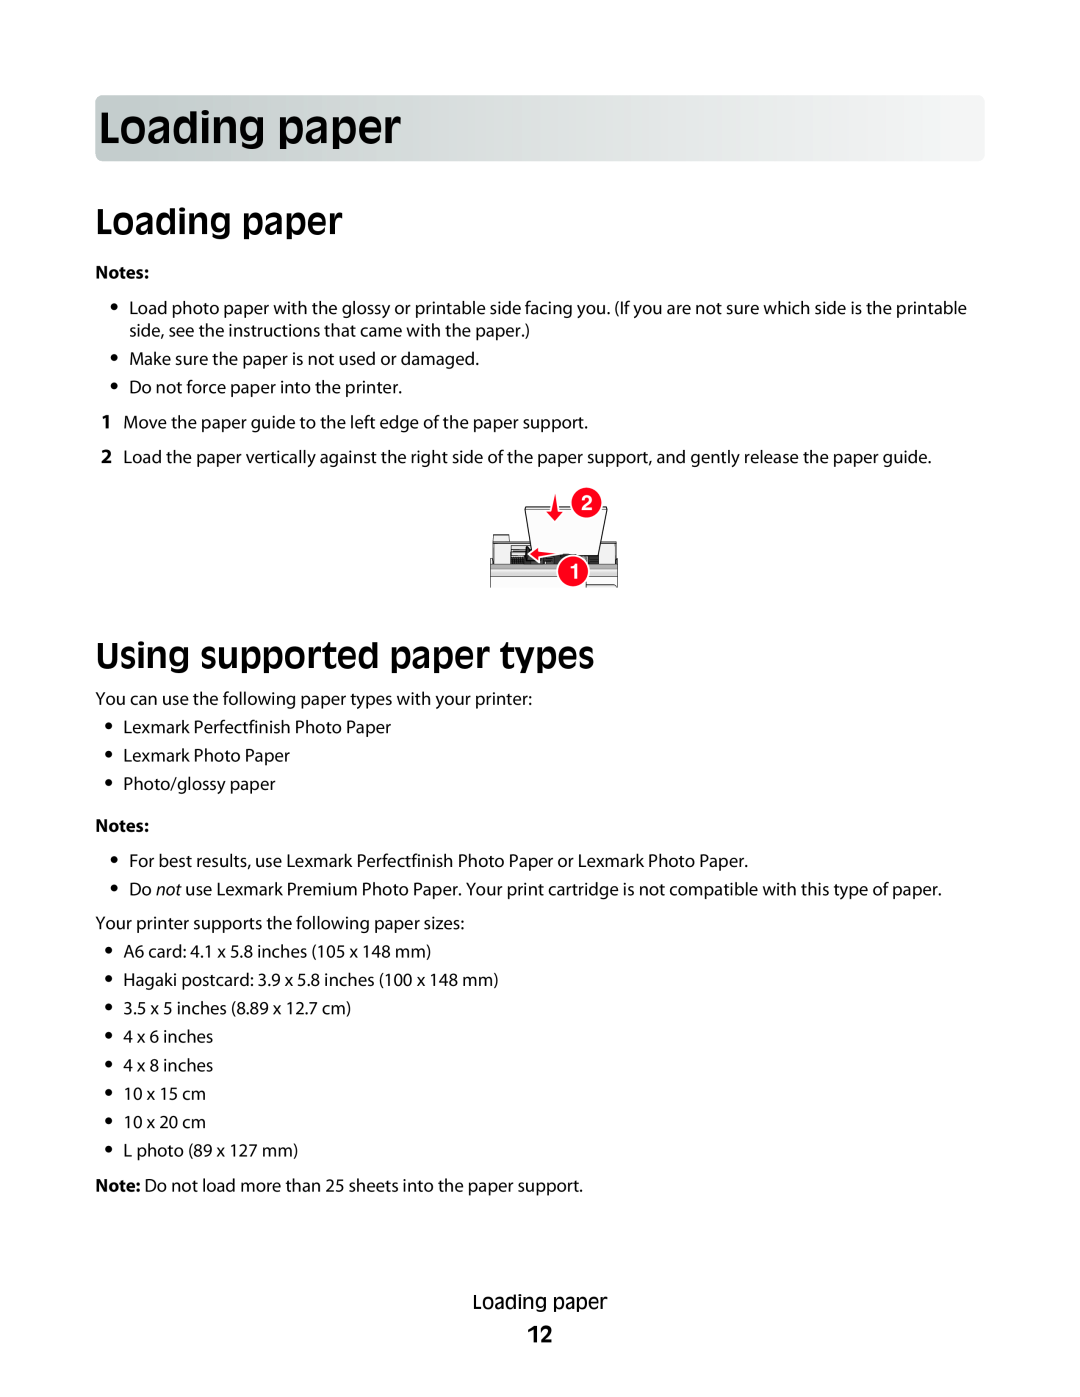 Lexmark P200 Series manual Loading paper, Using supported paper types 